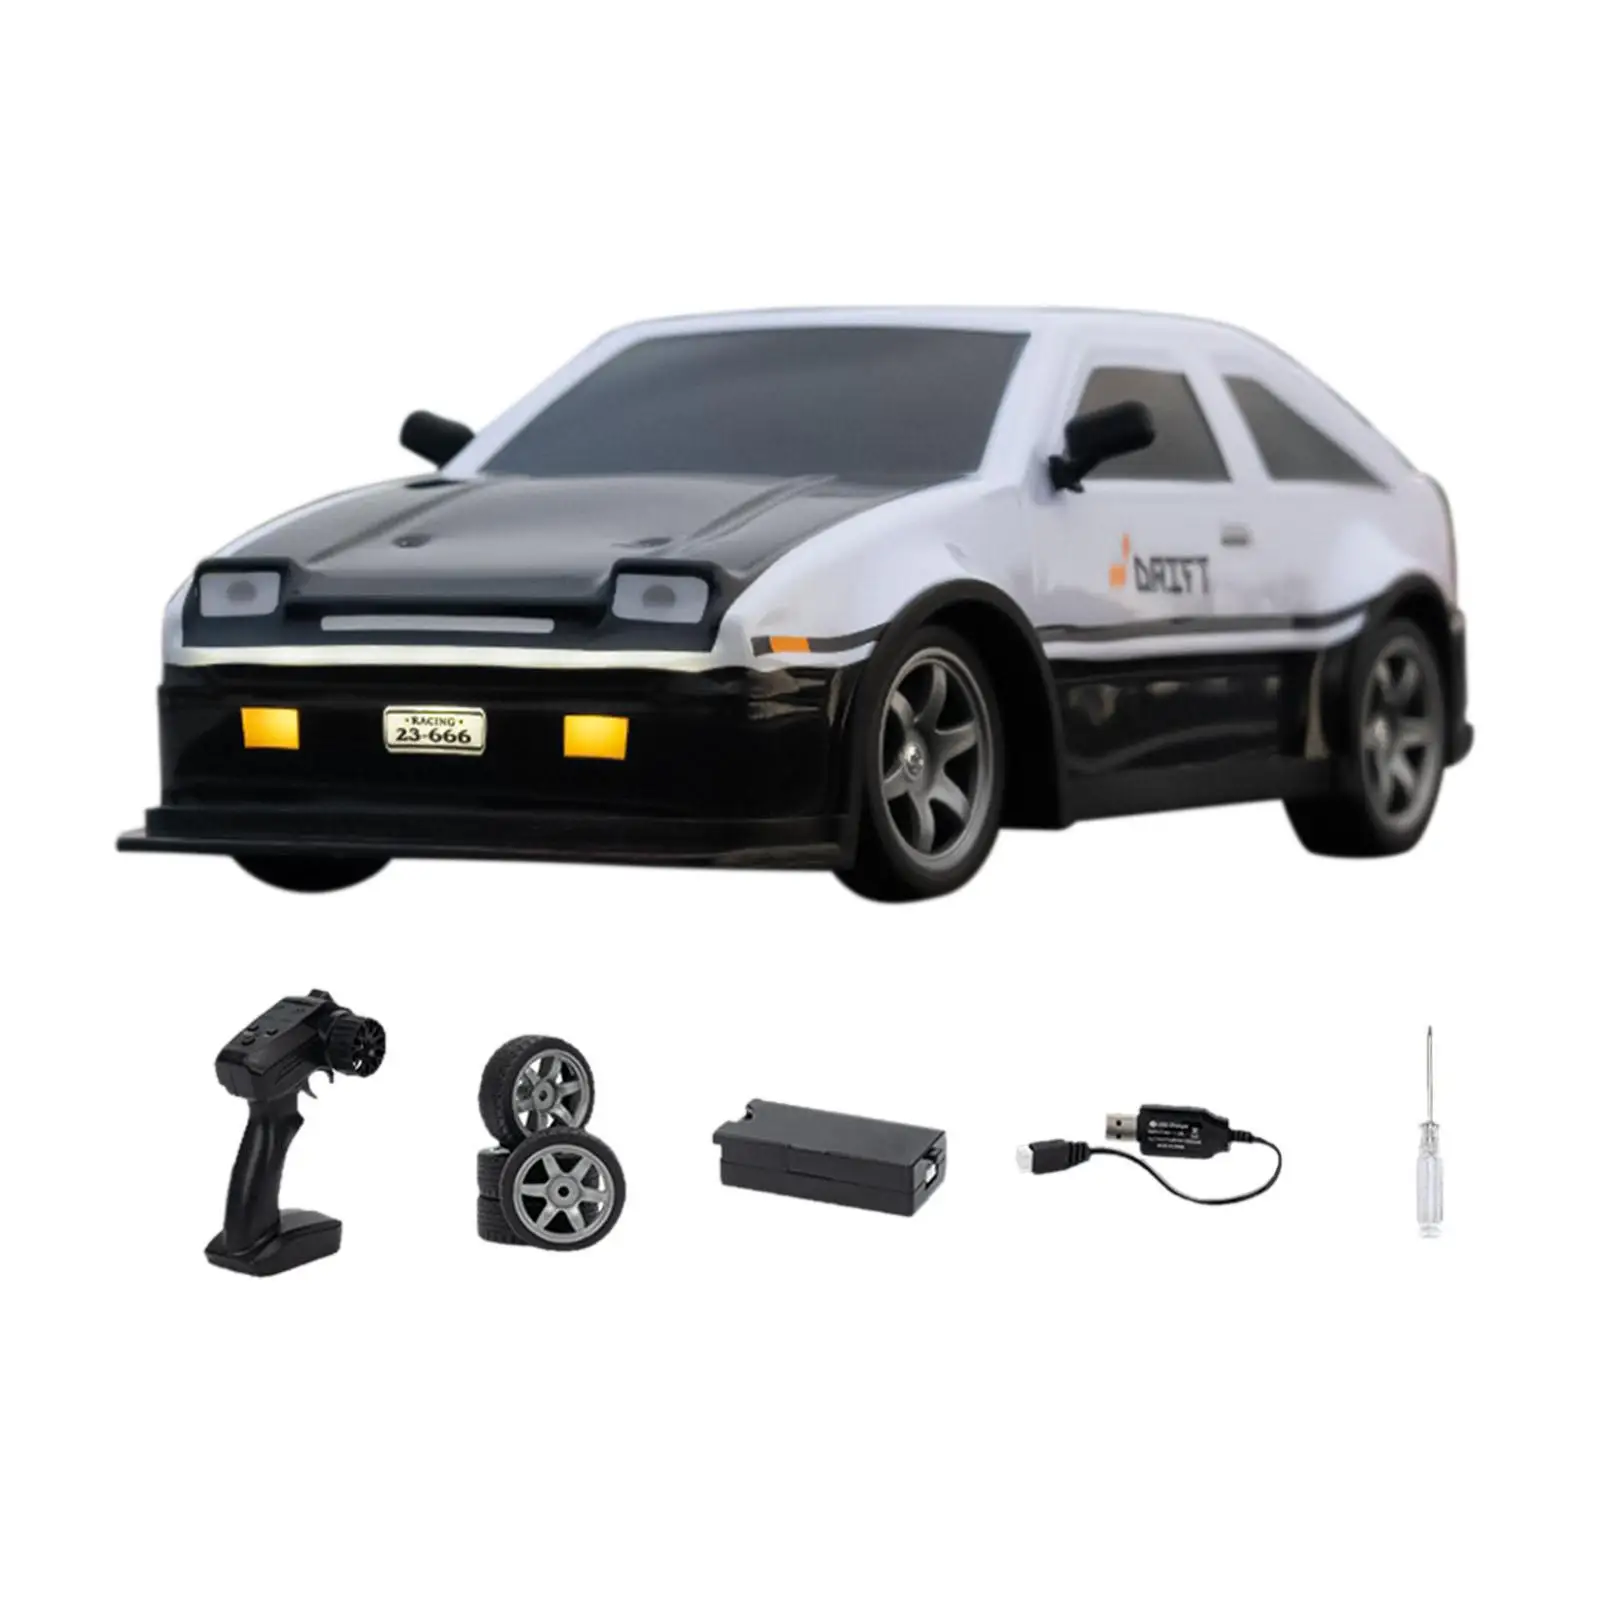 1:16 Scale RC Drift Car Drifting Tire Rechargeable 4WD Classic Vehicle Toy for Festivals Birthday Party Favors Holiday Present